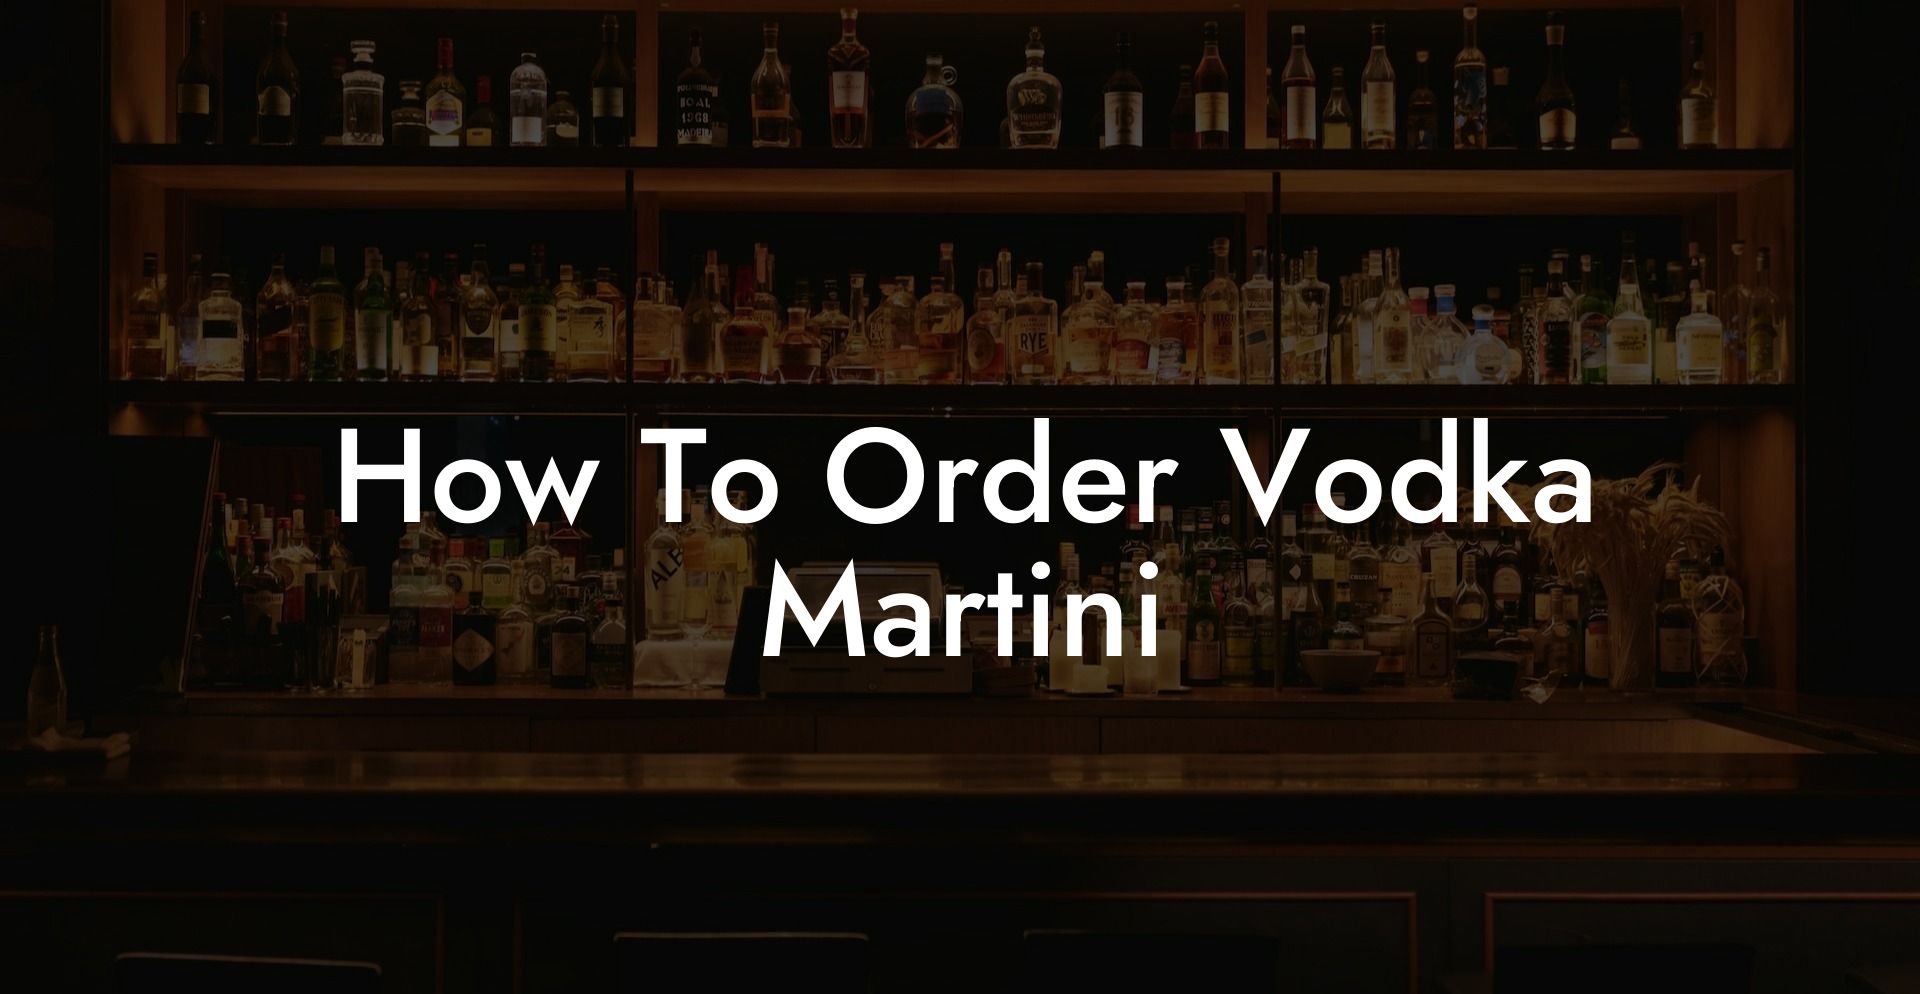 How To Order Vodka Martini